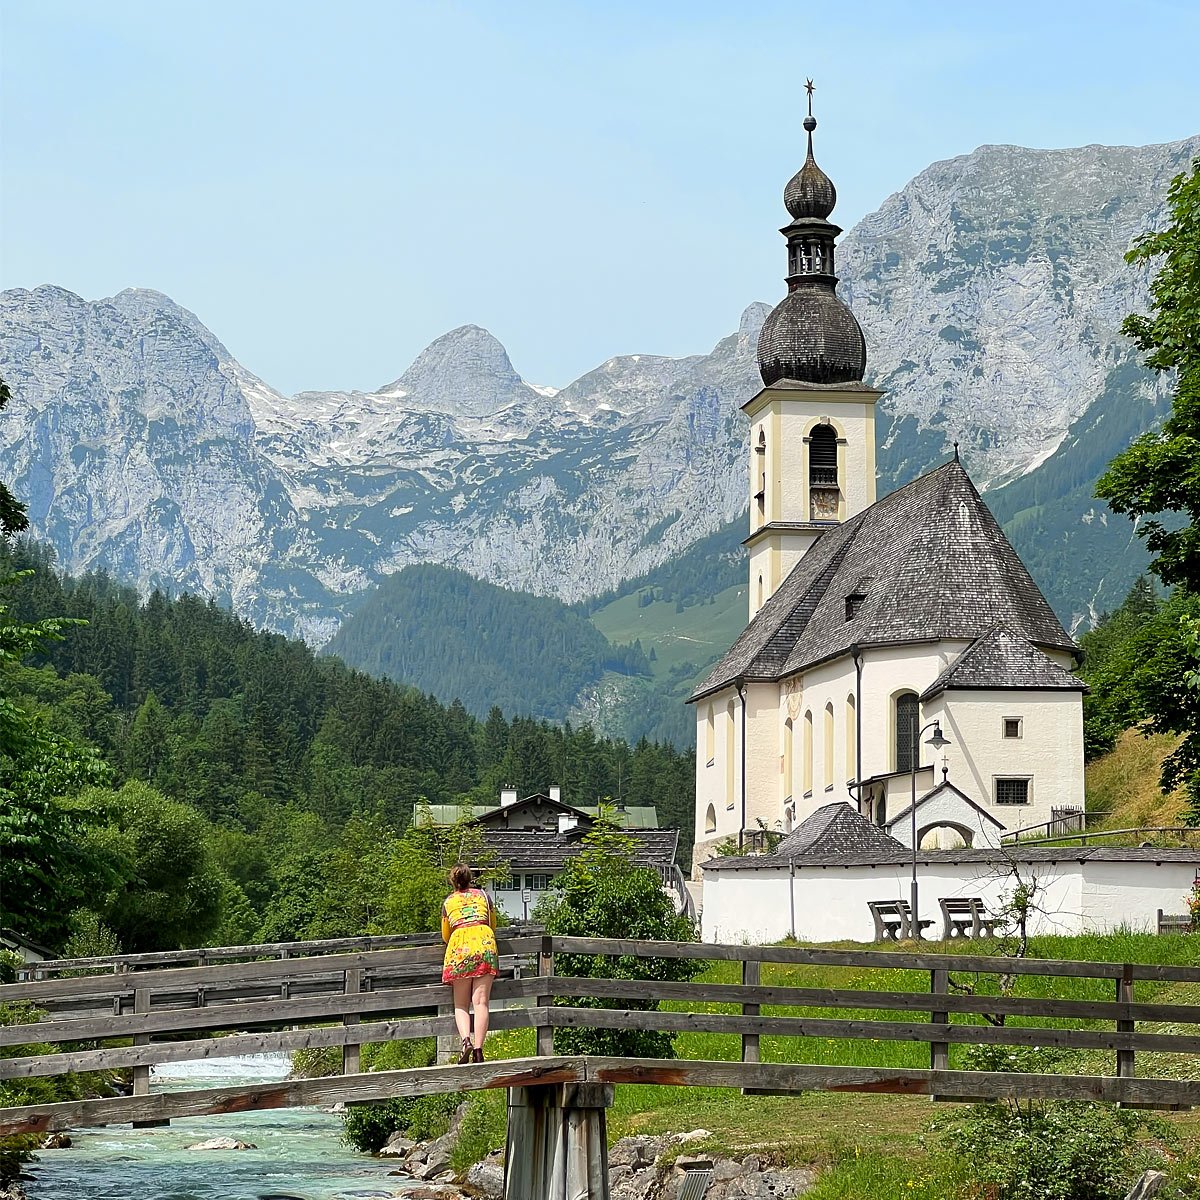 Berchtesgaden National Park: 11 Top Must-See Attractions